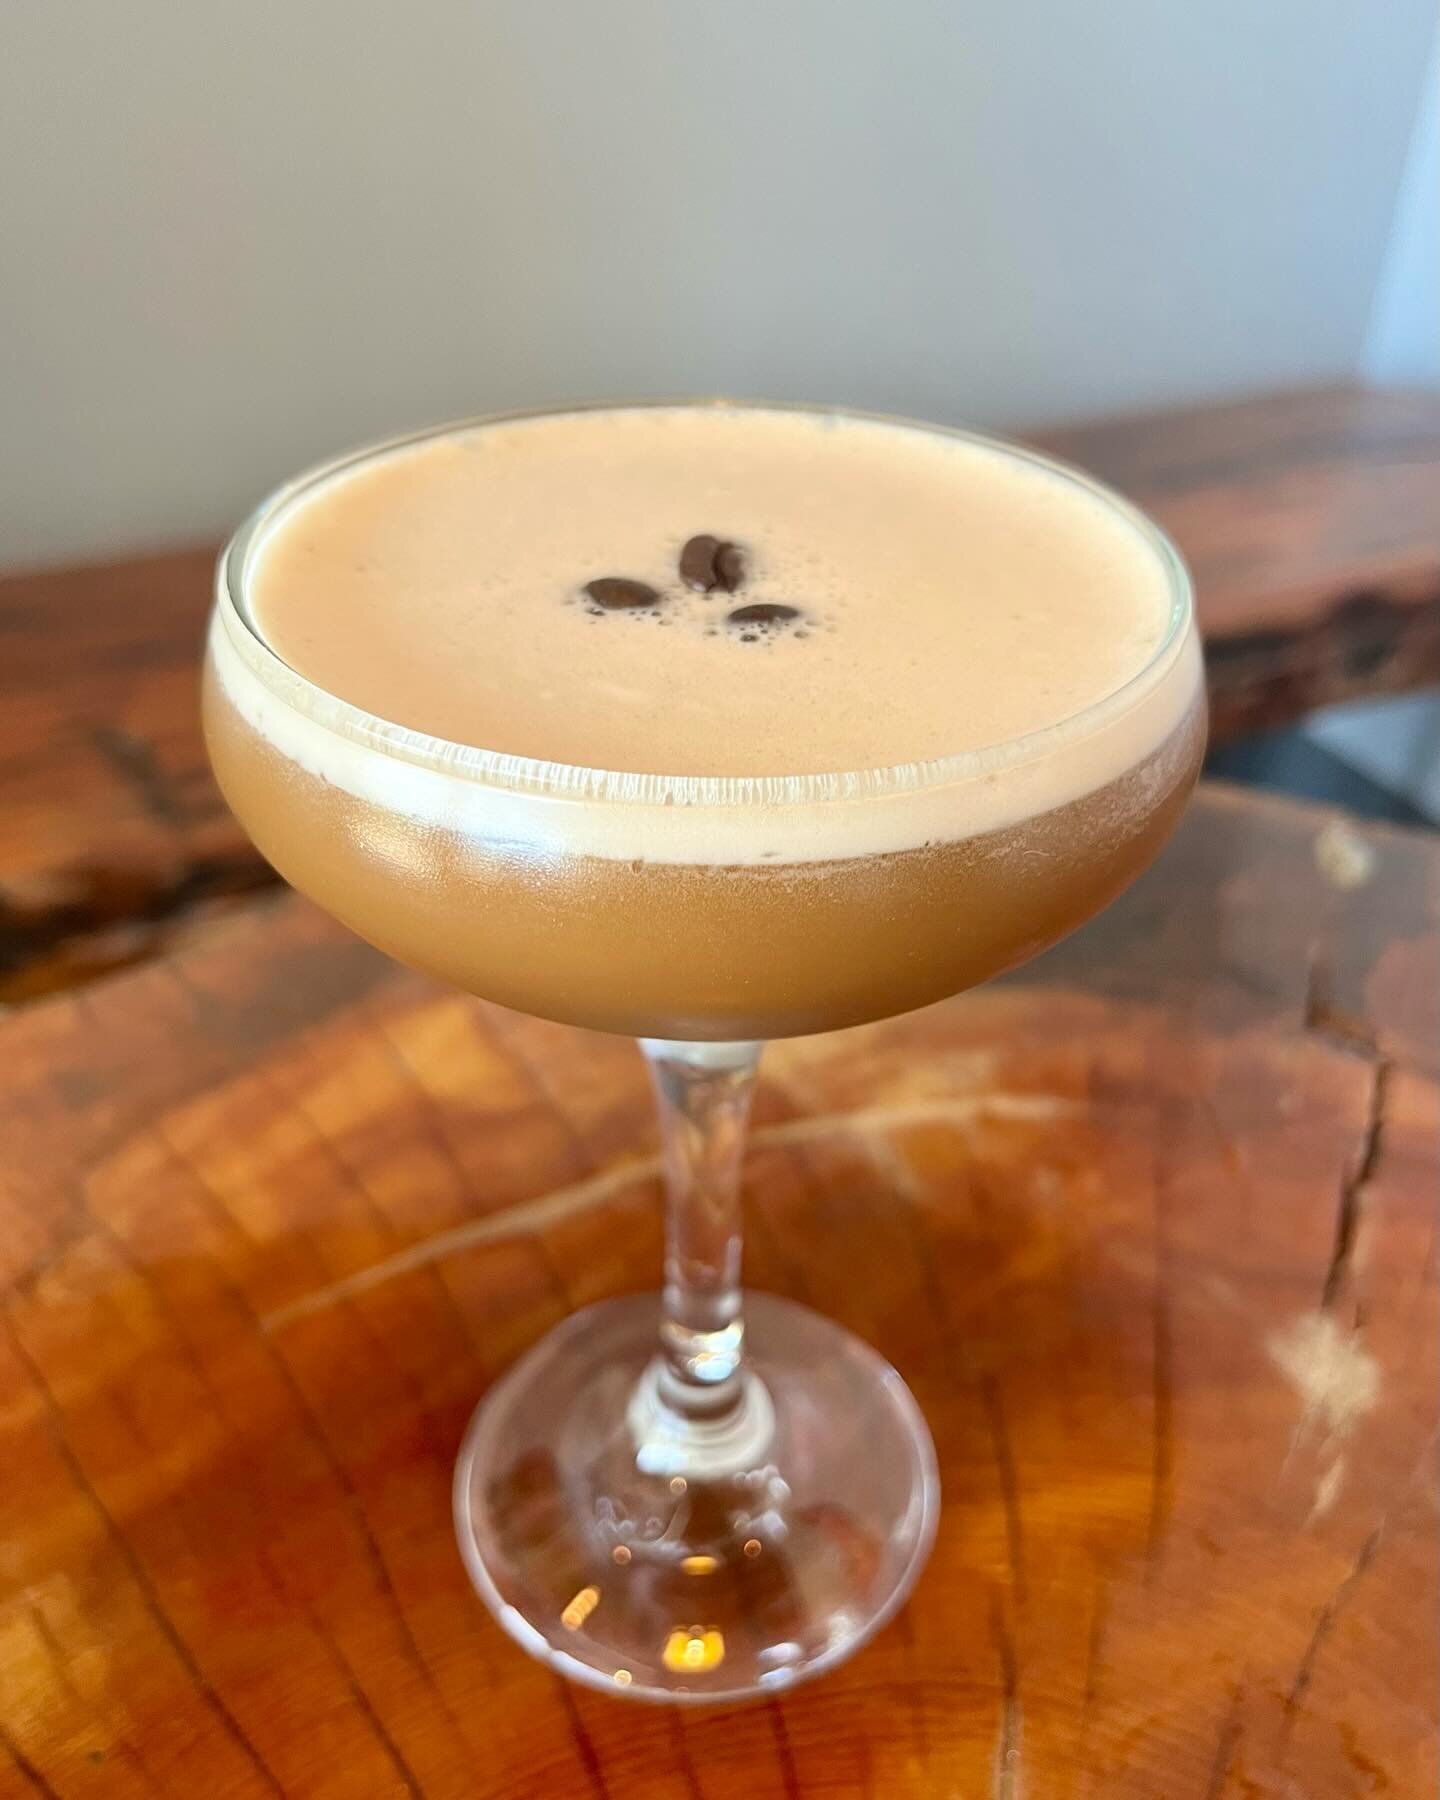 Fuel up this Friday with our spin on a classic: The Chai Honey Espresso Martini🍸 We cannot wait to cheers with you! 

Vodka &bull; Franklin Coffee Liqueur &bull; Espresso &bull; Chai Honey Syrup &bull; Coconut Milk 

#elevatingspiritslocally #elevat